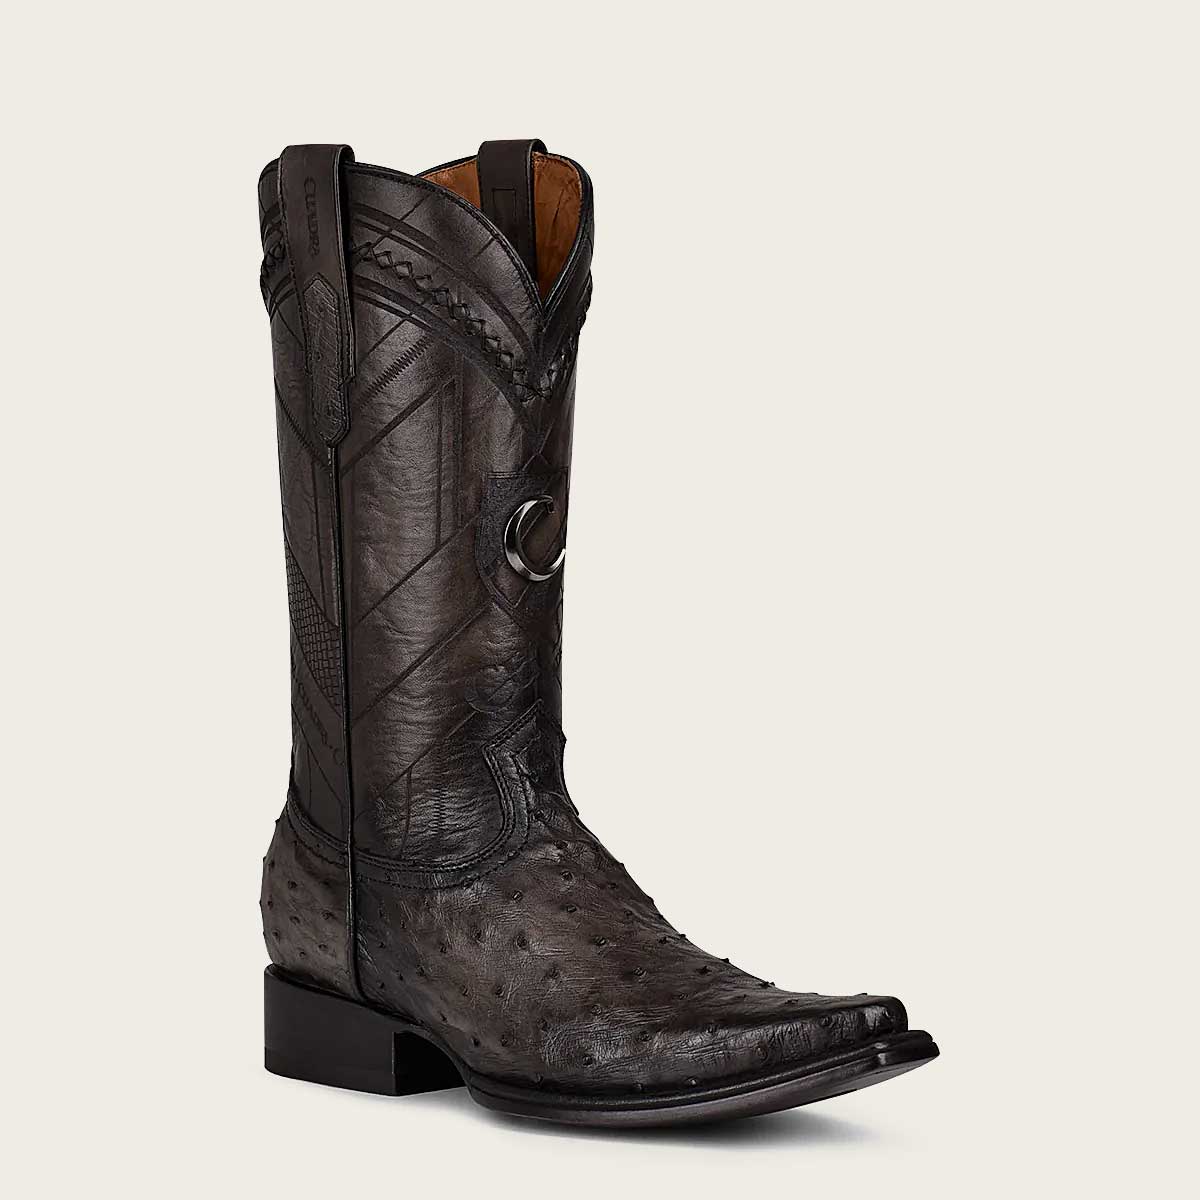 Stylish grey boot crafted from exotic leather with intricate engravings for a unique touch.